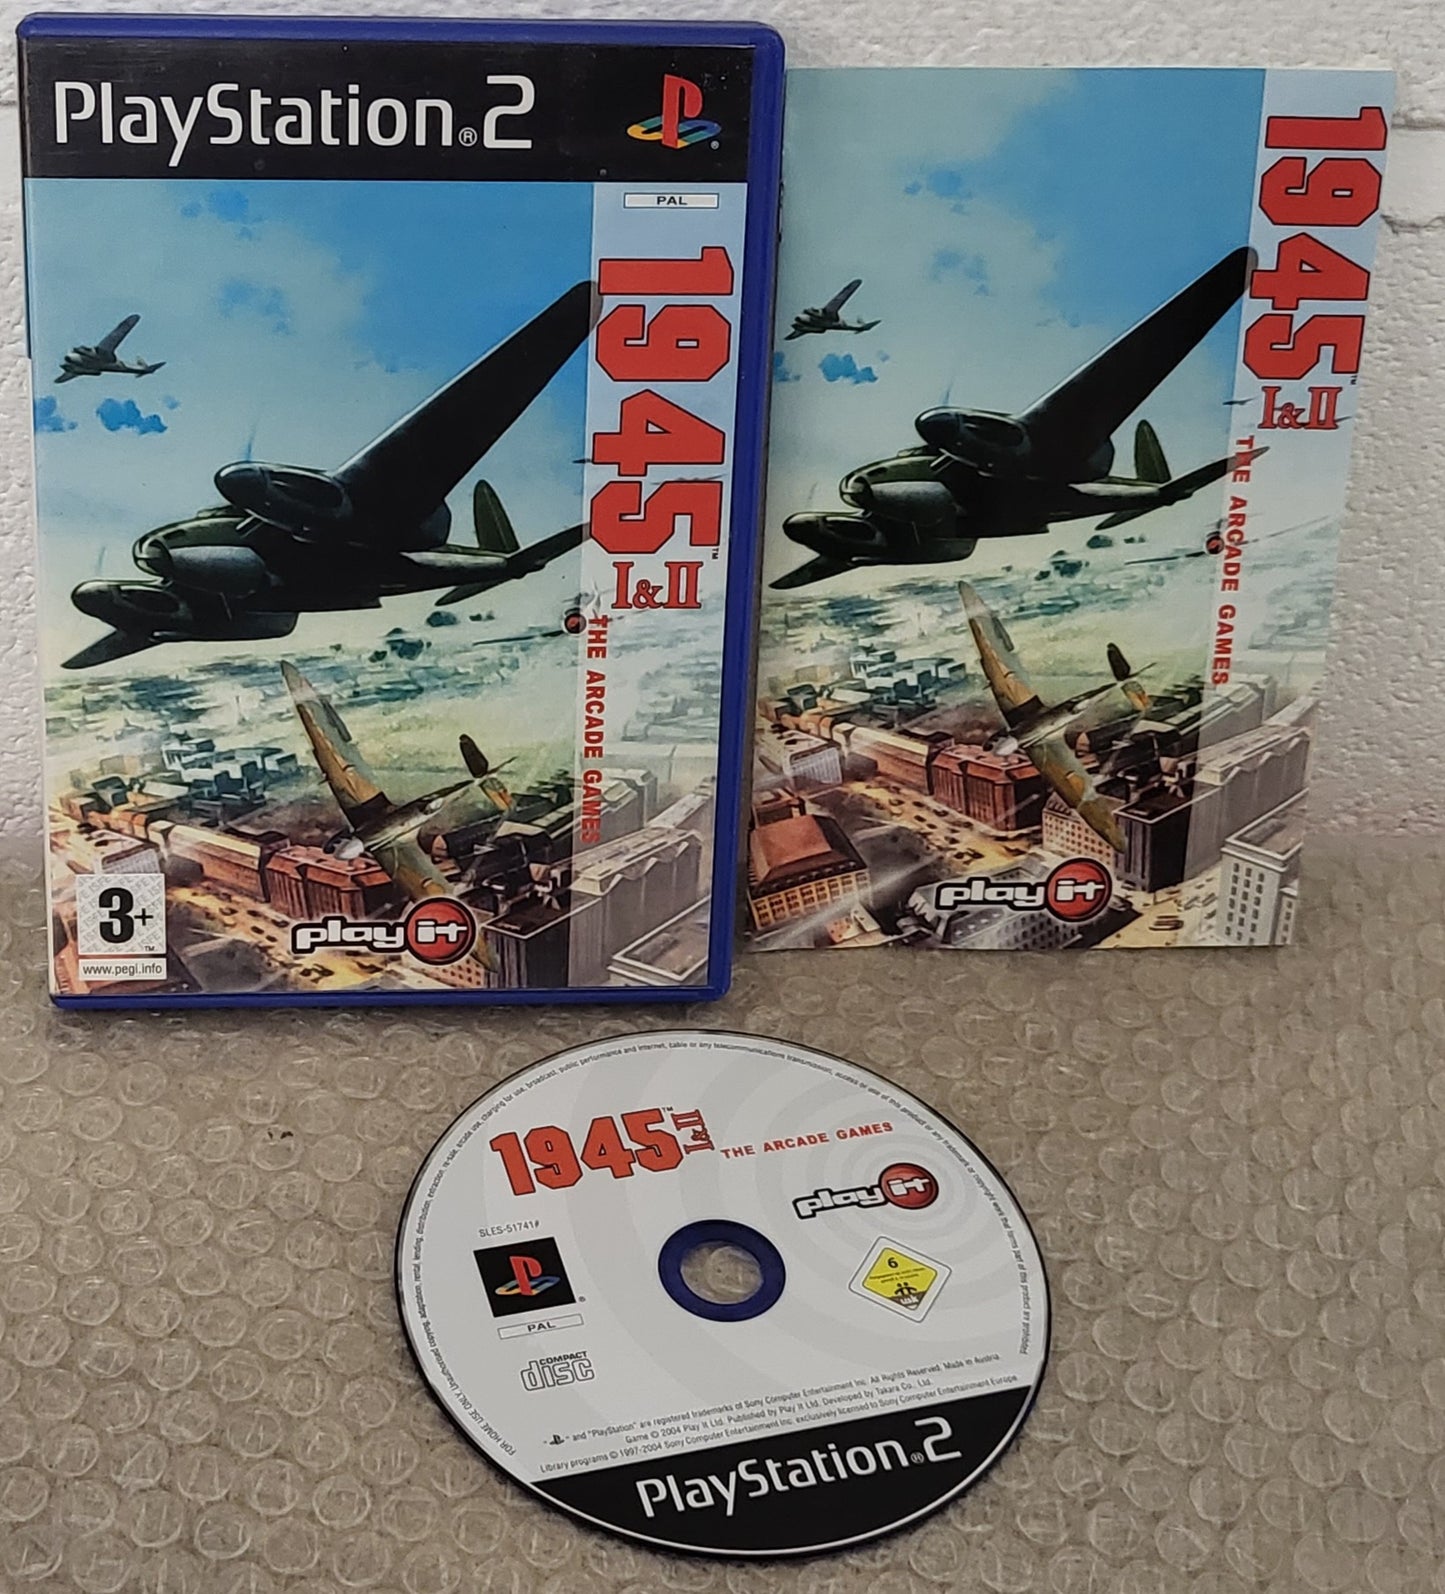 1945 I & II The Arcade games Sony Playstation 2 (PS2) Game